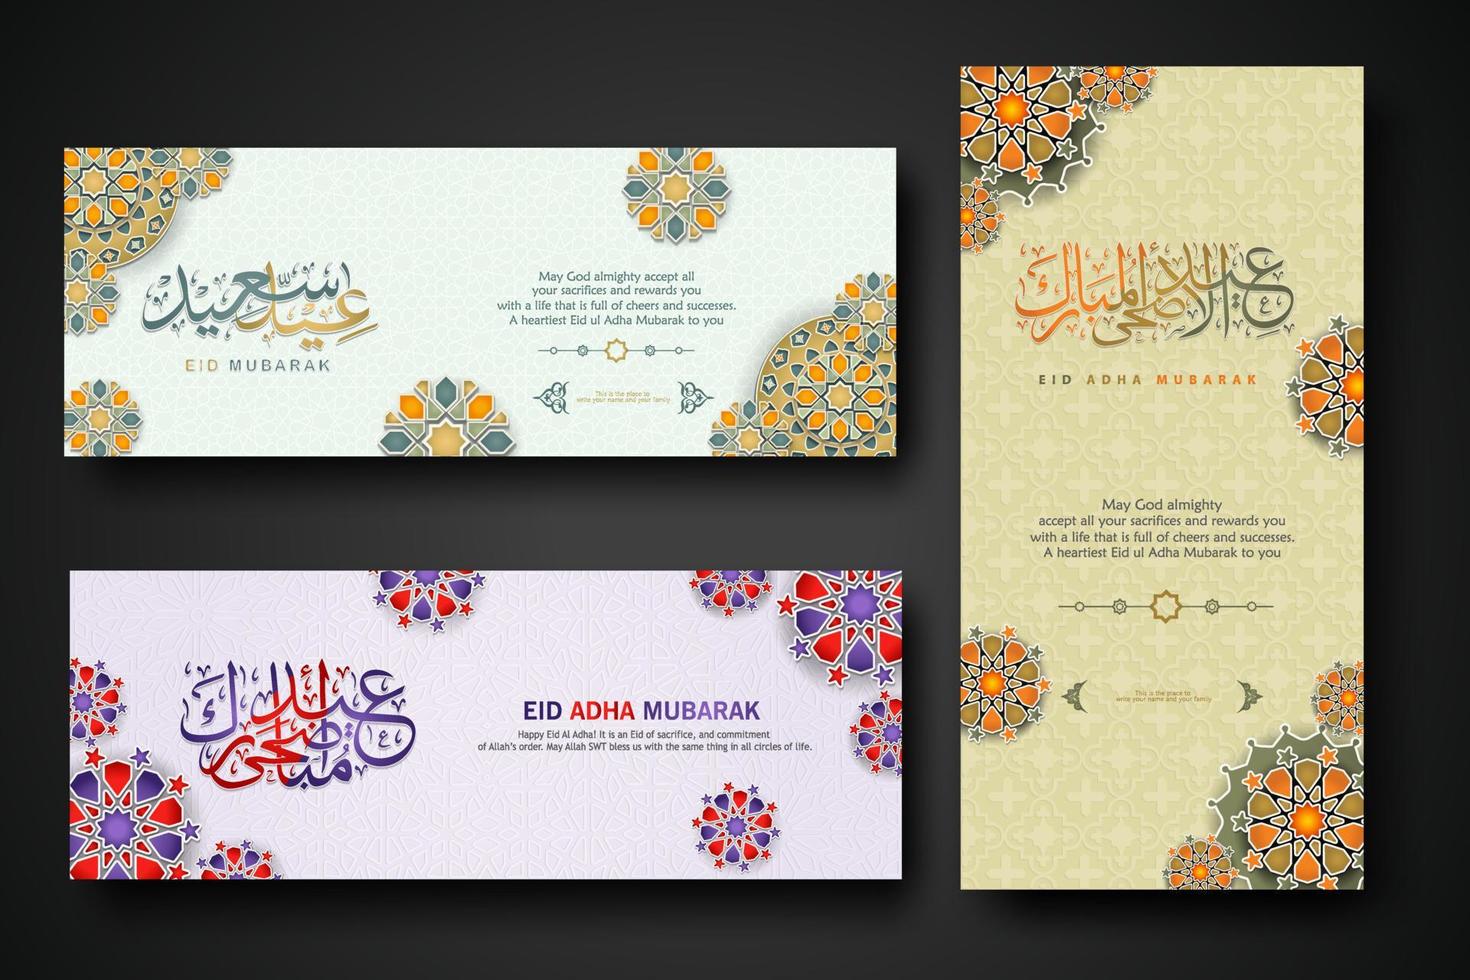 Eid al adha concept banner with arabic calligraphy and 3d paper flowers on Islamic geometric pattern background. Vector illustration.